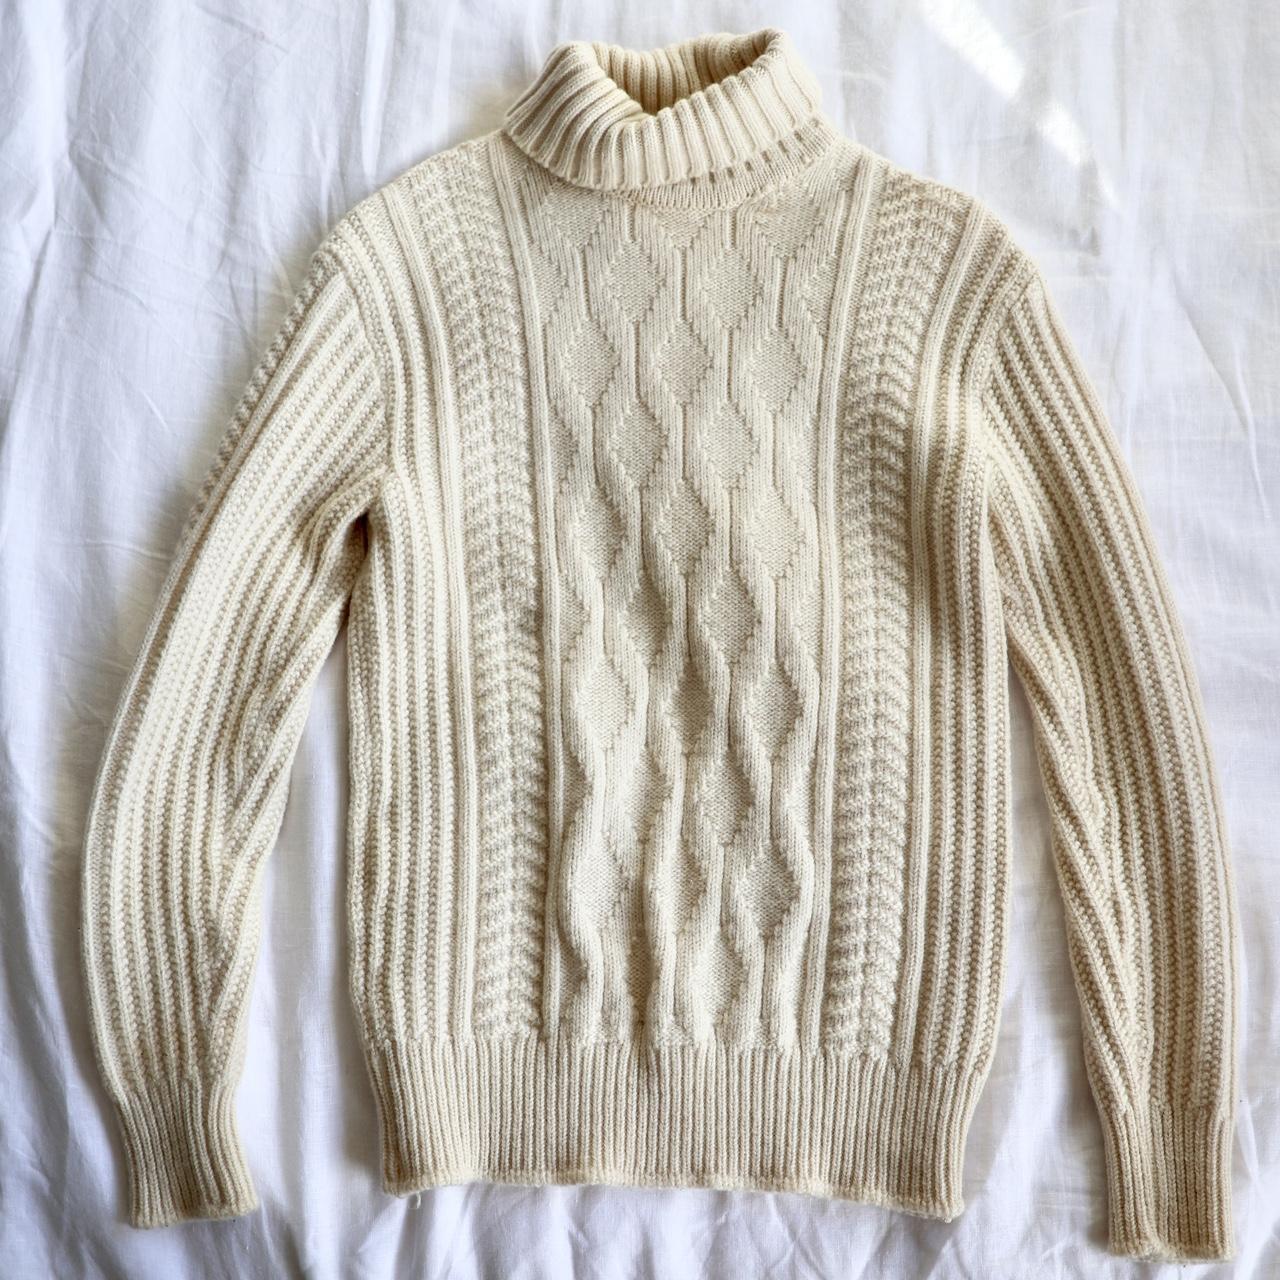 100% wool, made in Australia 🐏 Vintage cable knit,... - Depop